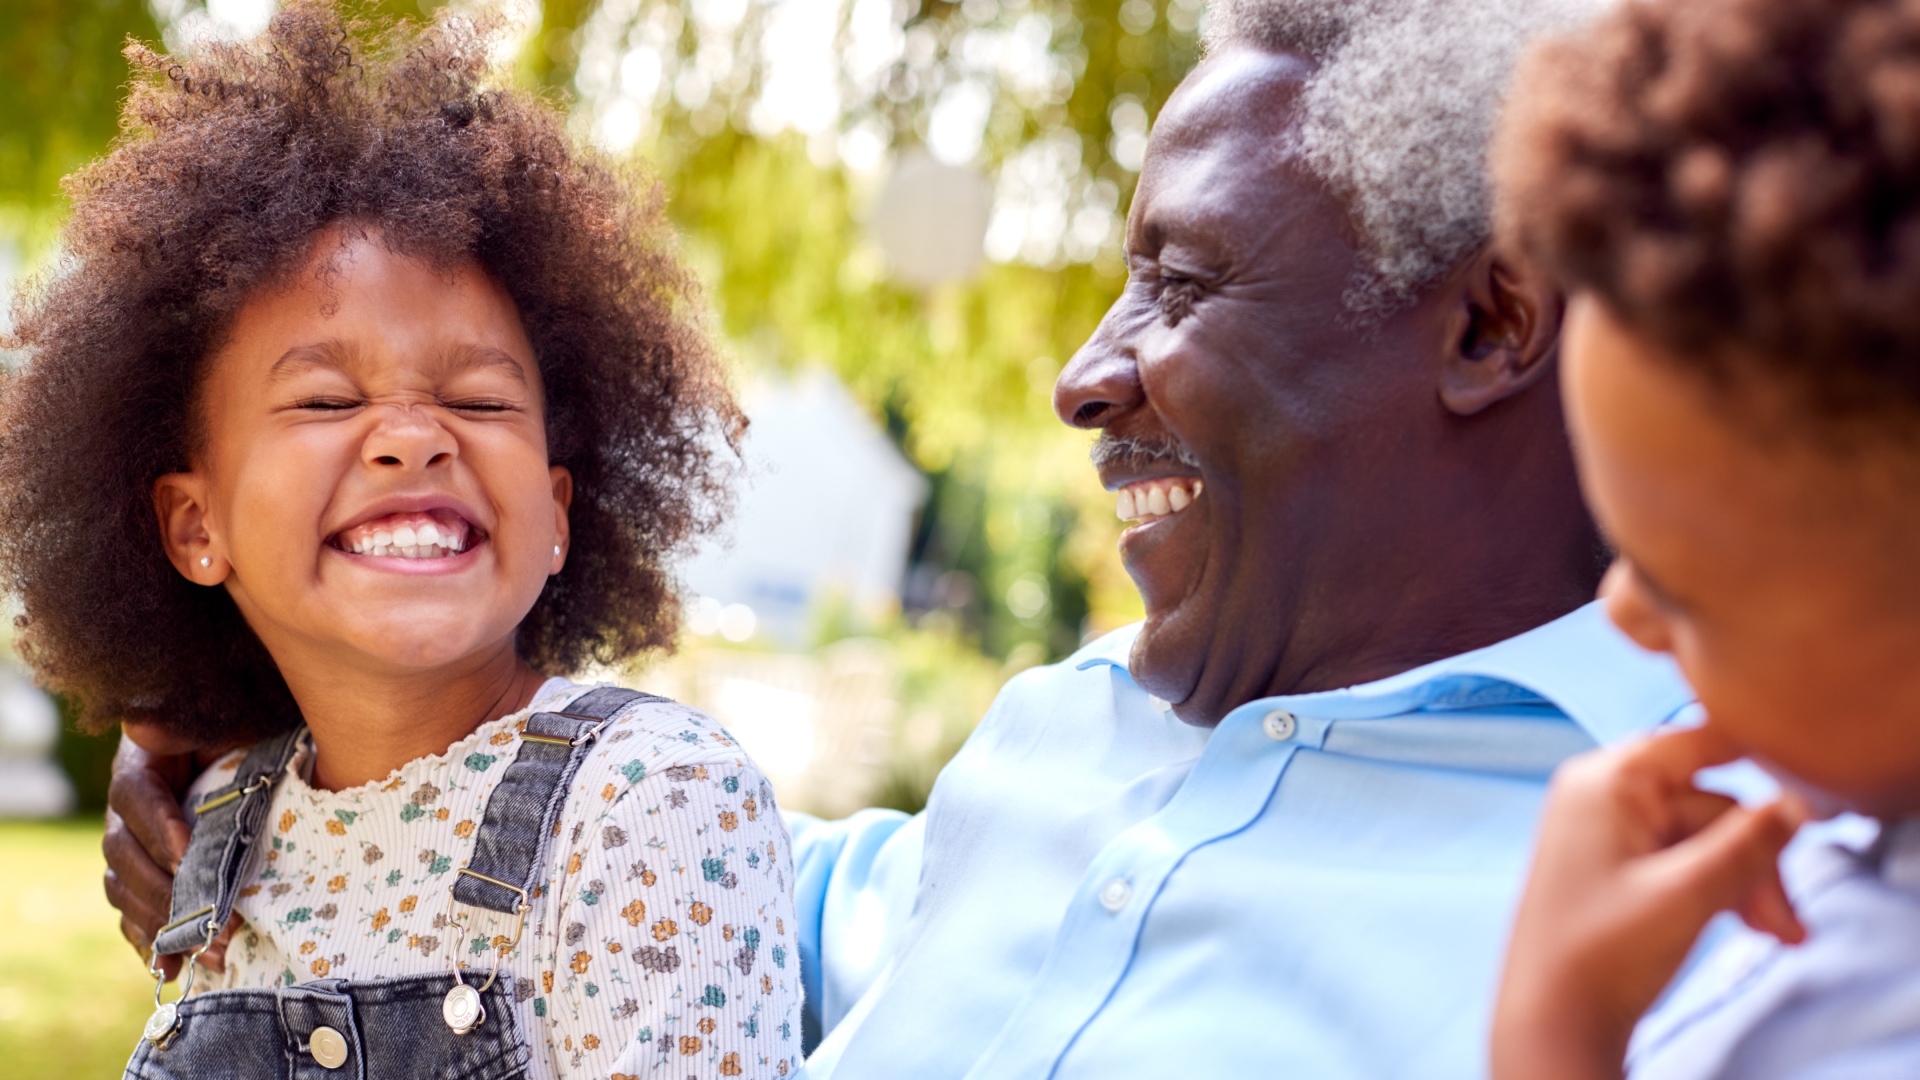 Close-up of a Black grandparent and grandchild smiling and laughing outside with foliage blurred behind them.